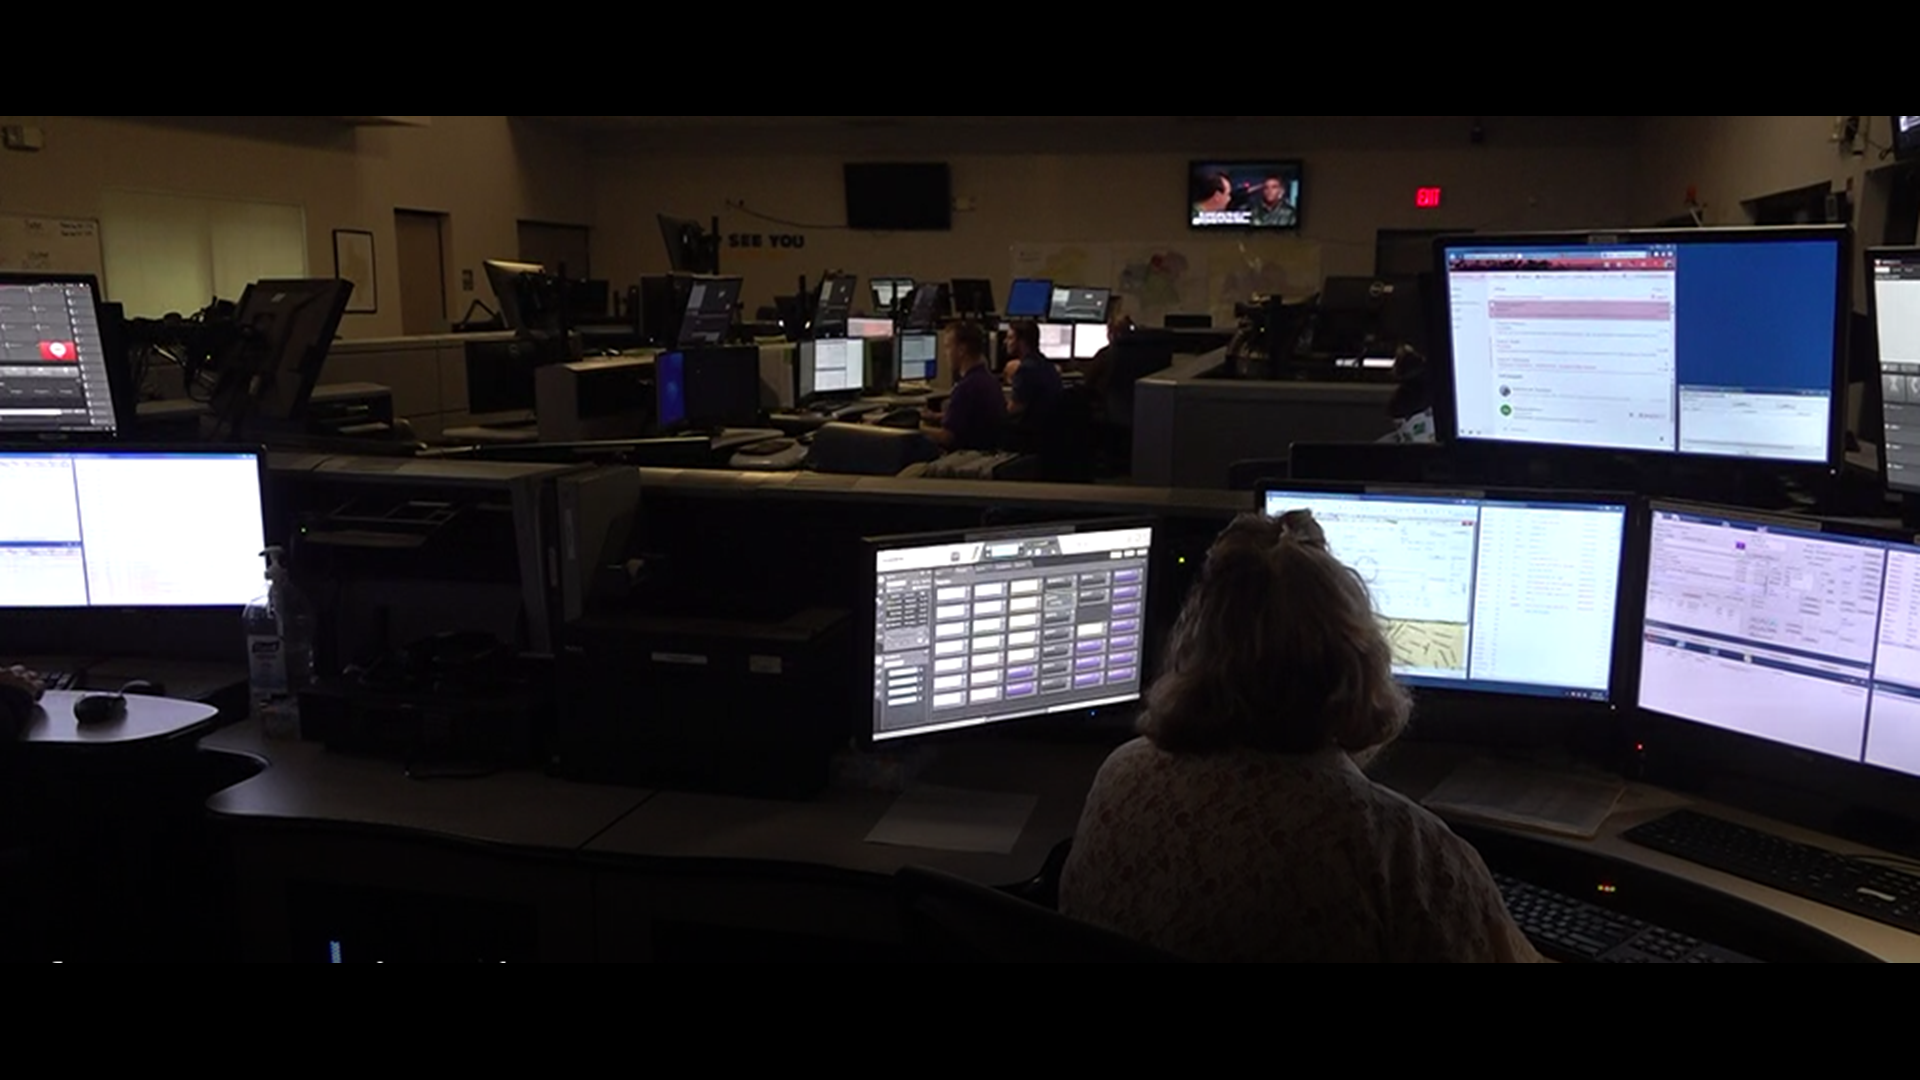 The US Department of Transportation and Commerce announced more than $109 million in grants to upgrade 911 call centers.